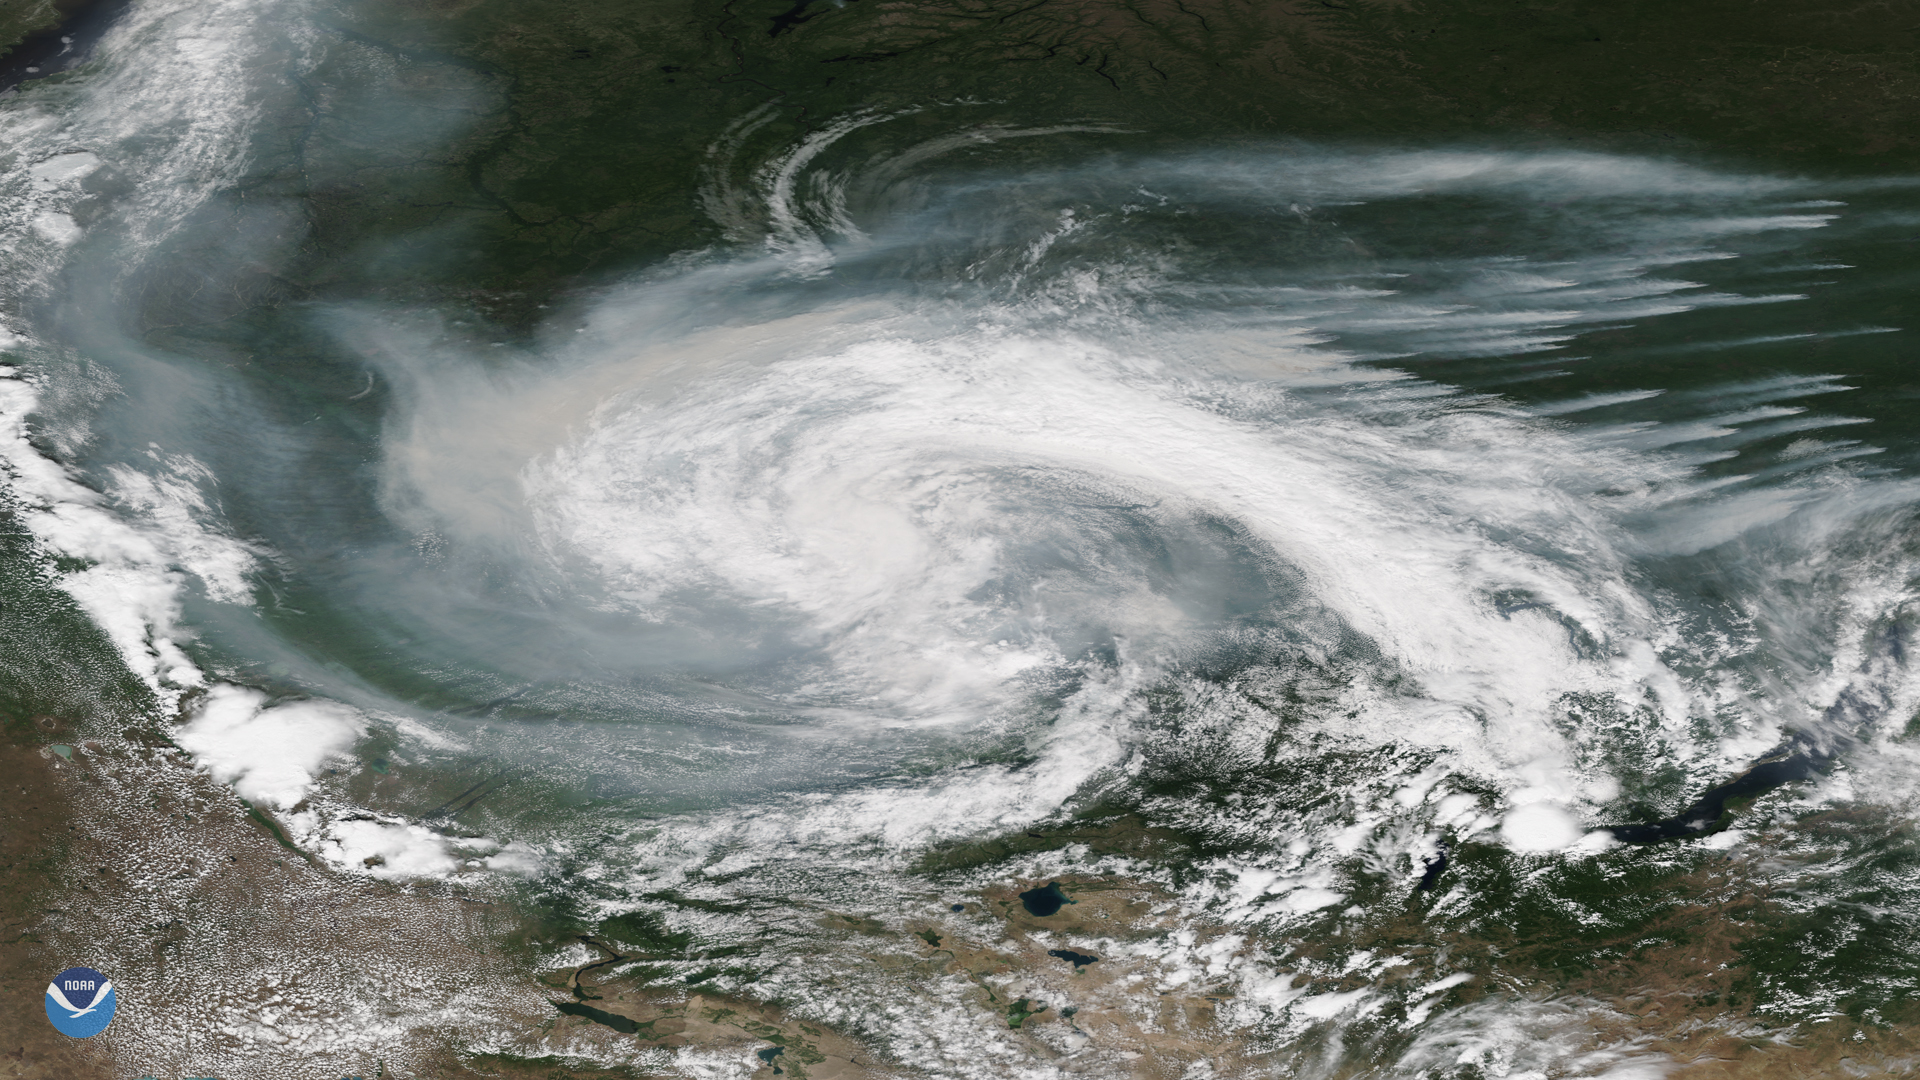 Wildfire Smoke Gets Trapped in Low Pressure System Over Russia